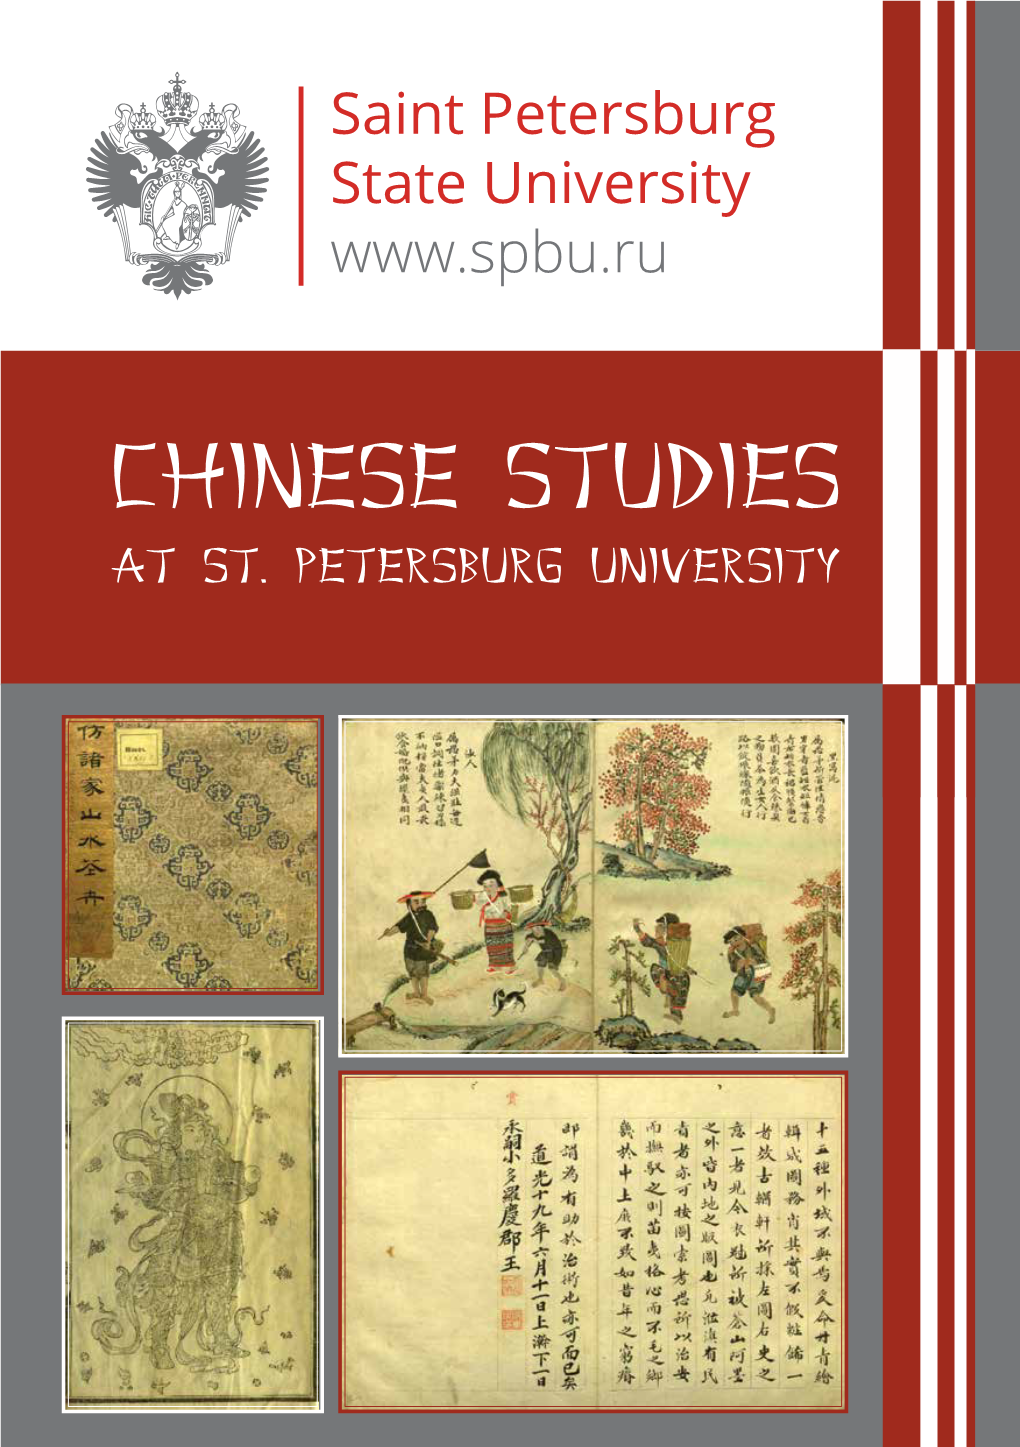 CHINESE STUDIES at St